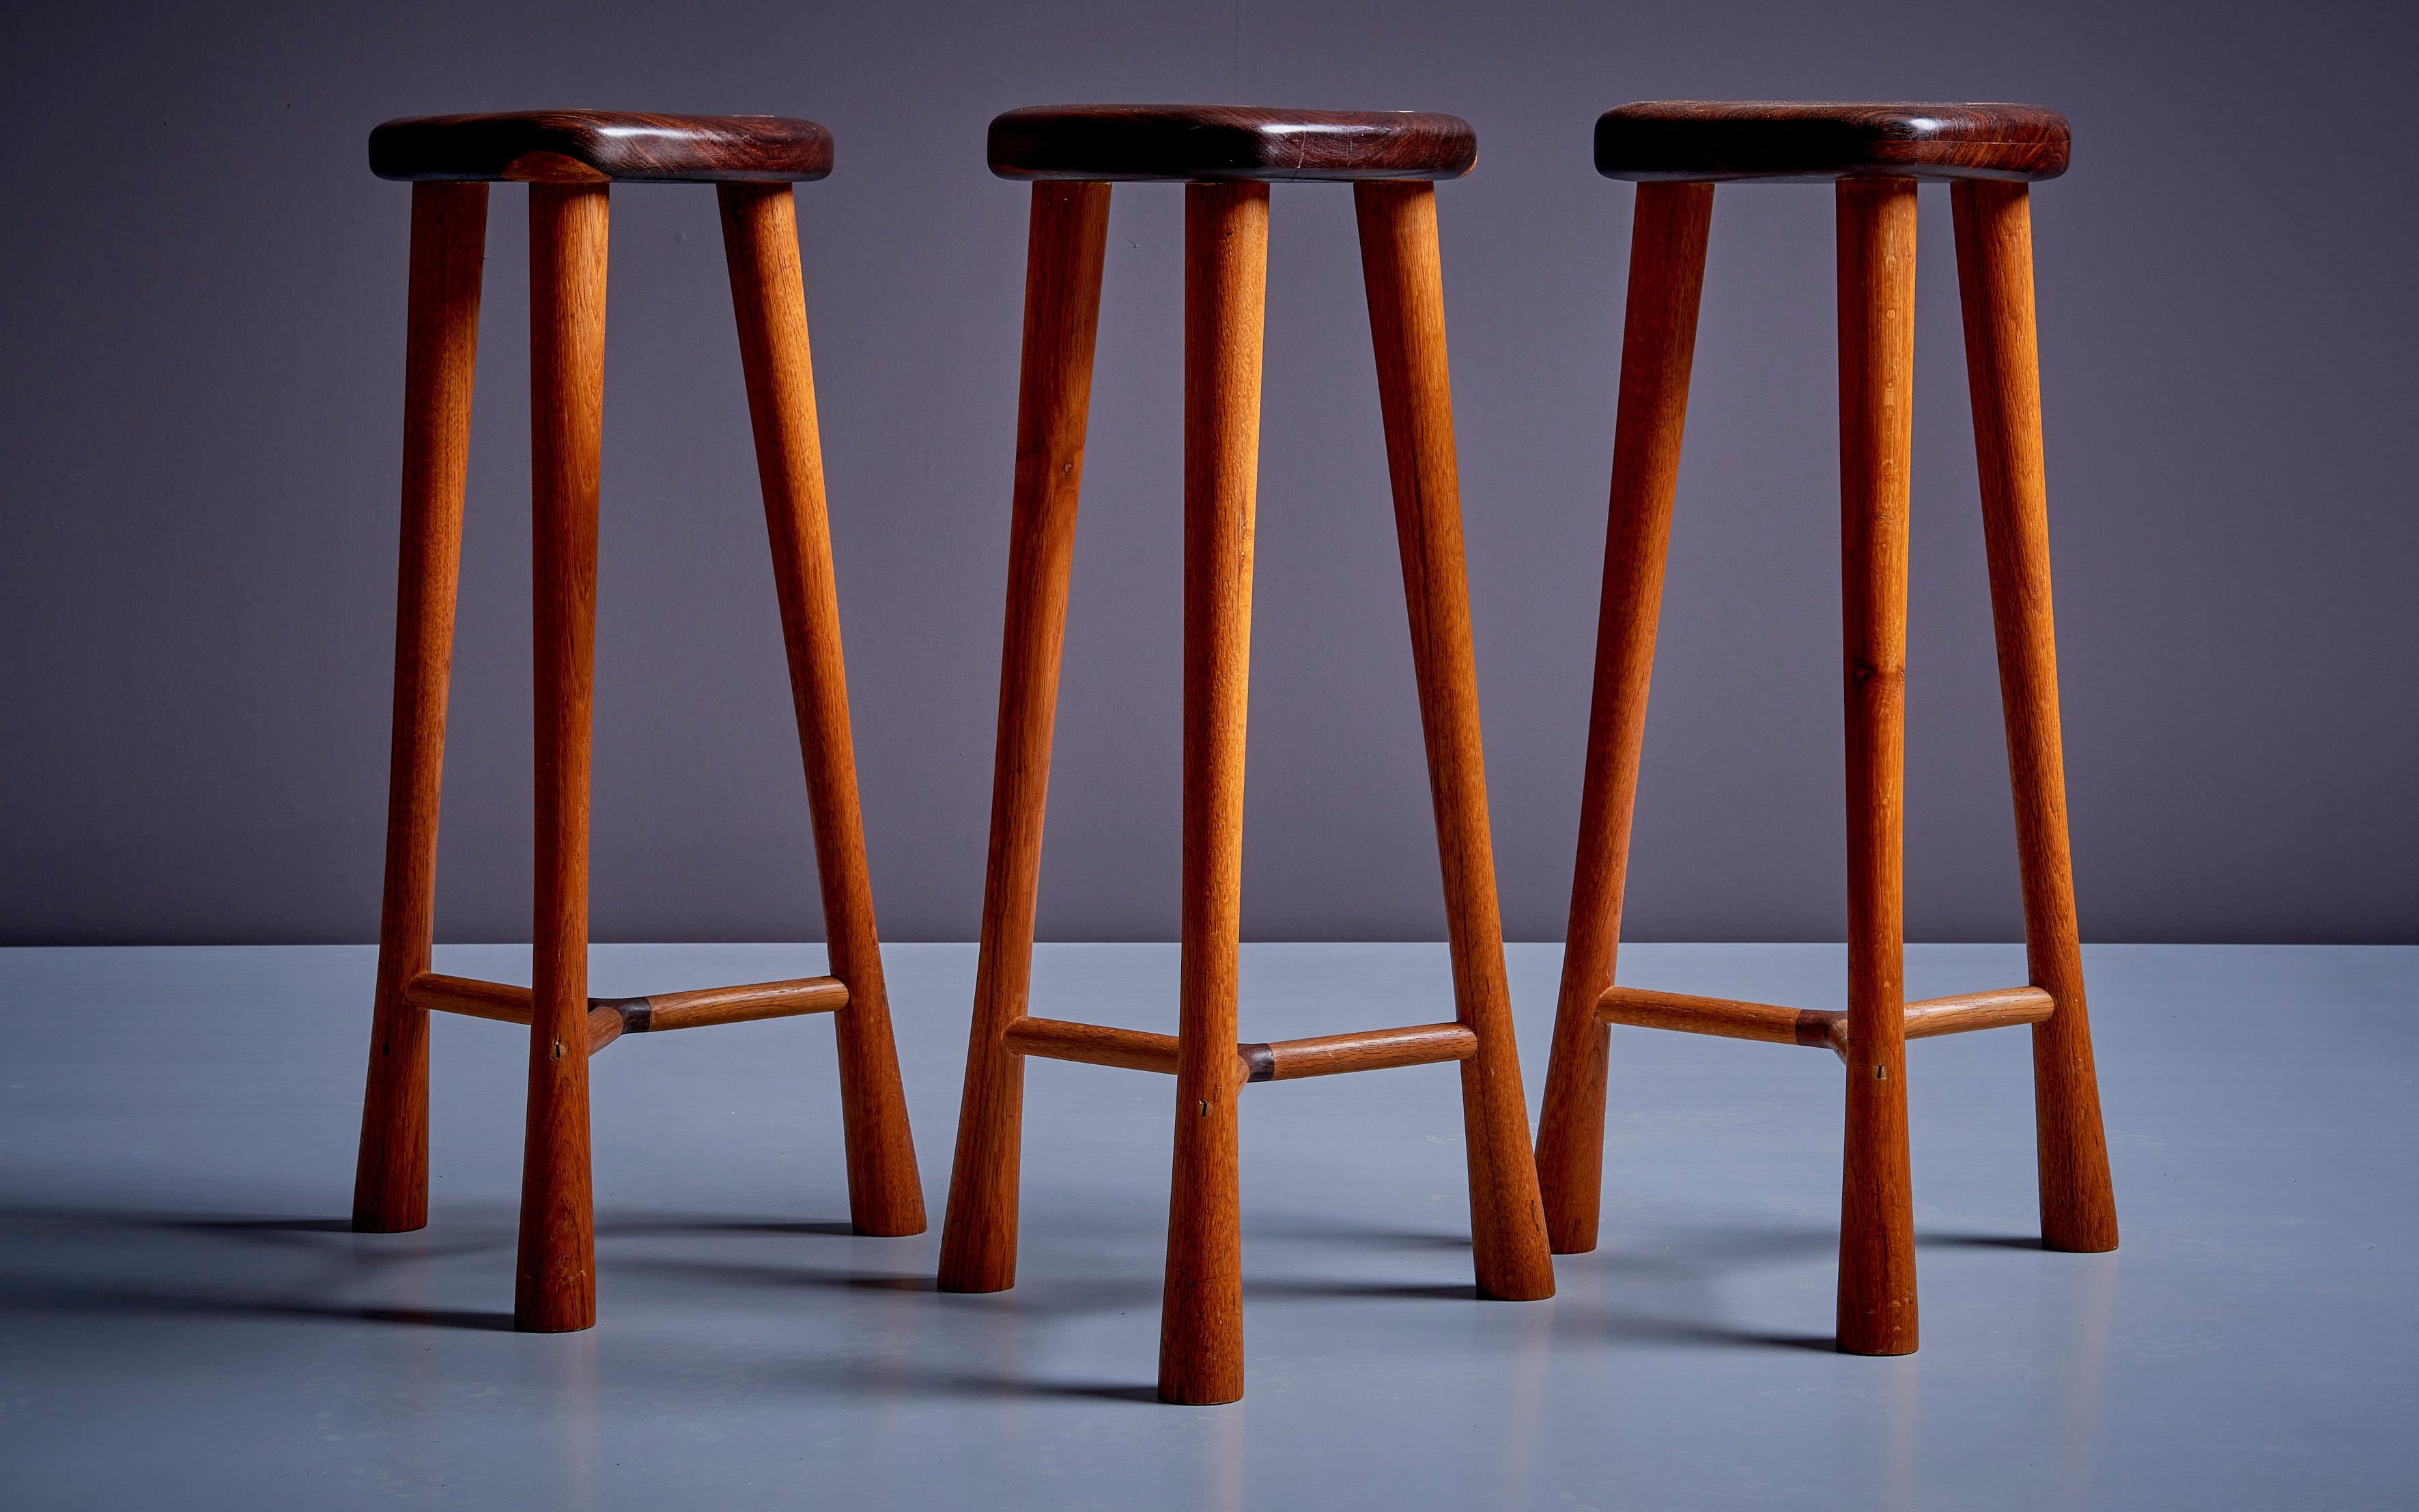 Set of three Studio stools, USA - 1980s in very good condition. Oak base and rosewood top. 